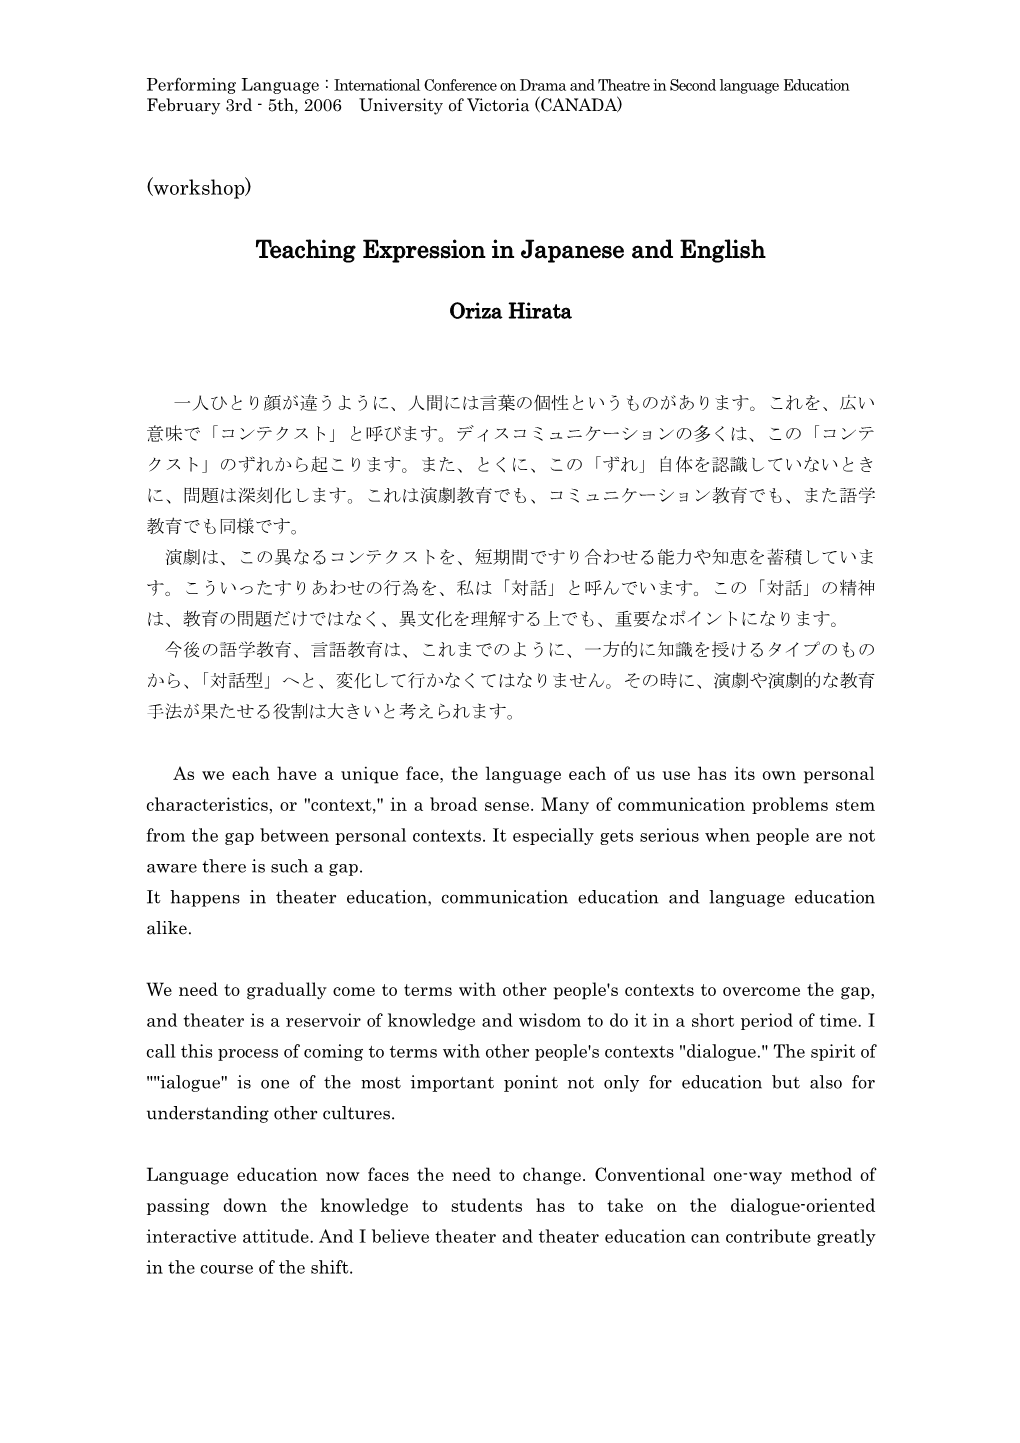 (Workshop) Teaching Expression in Japanese and English